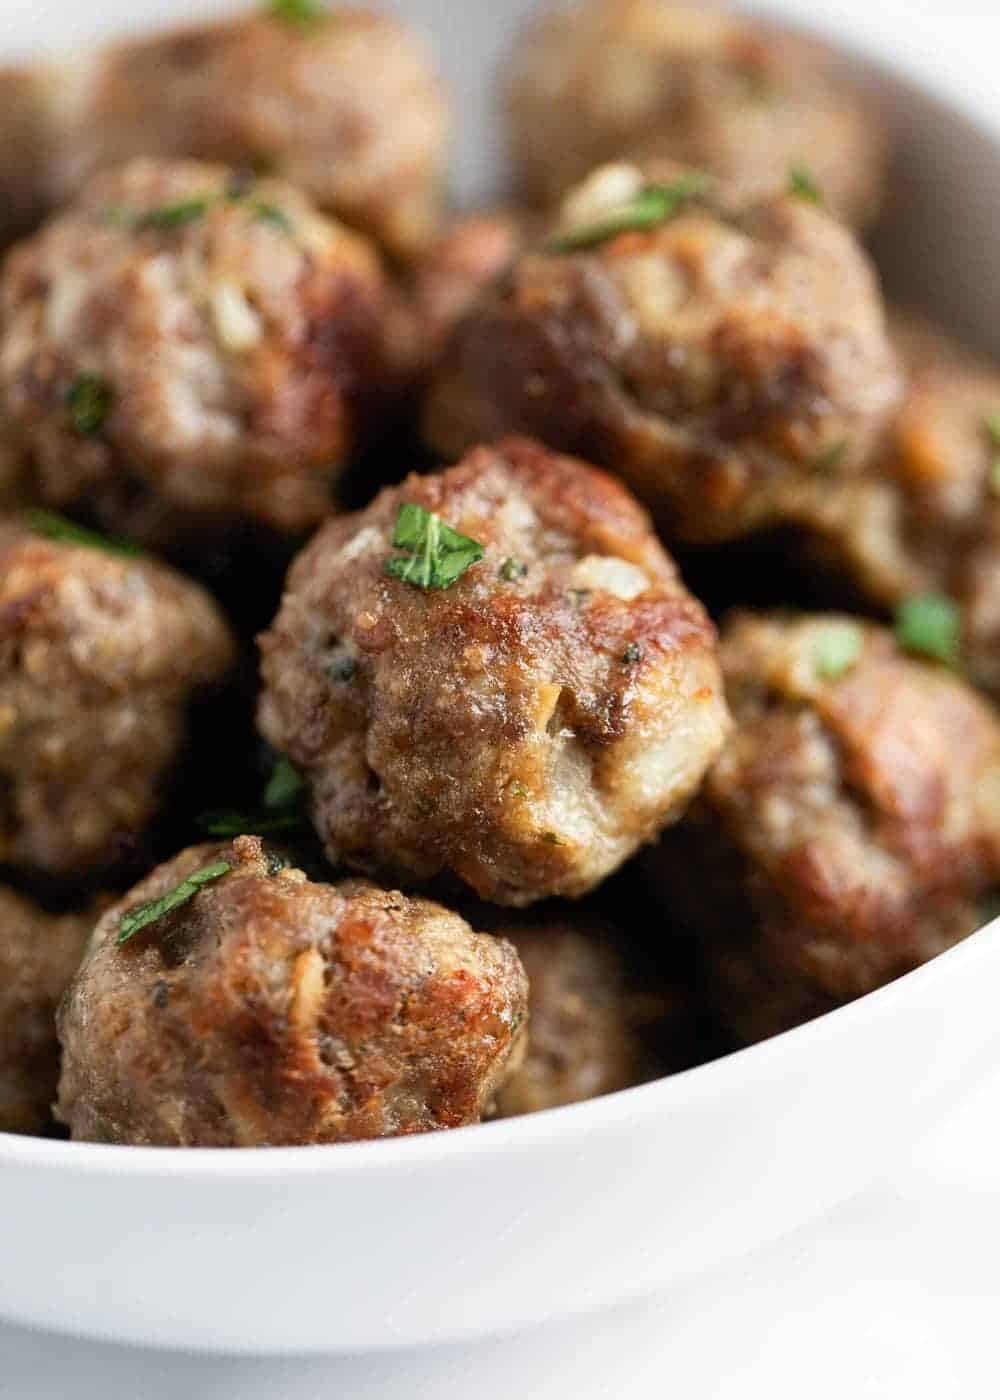 Easy Homemade Meatball Recipe Oven Baked I Heart Naptime,Grilled Pears Salad